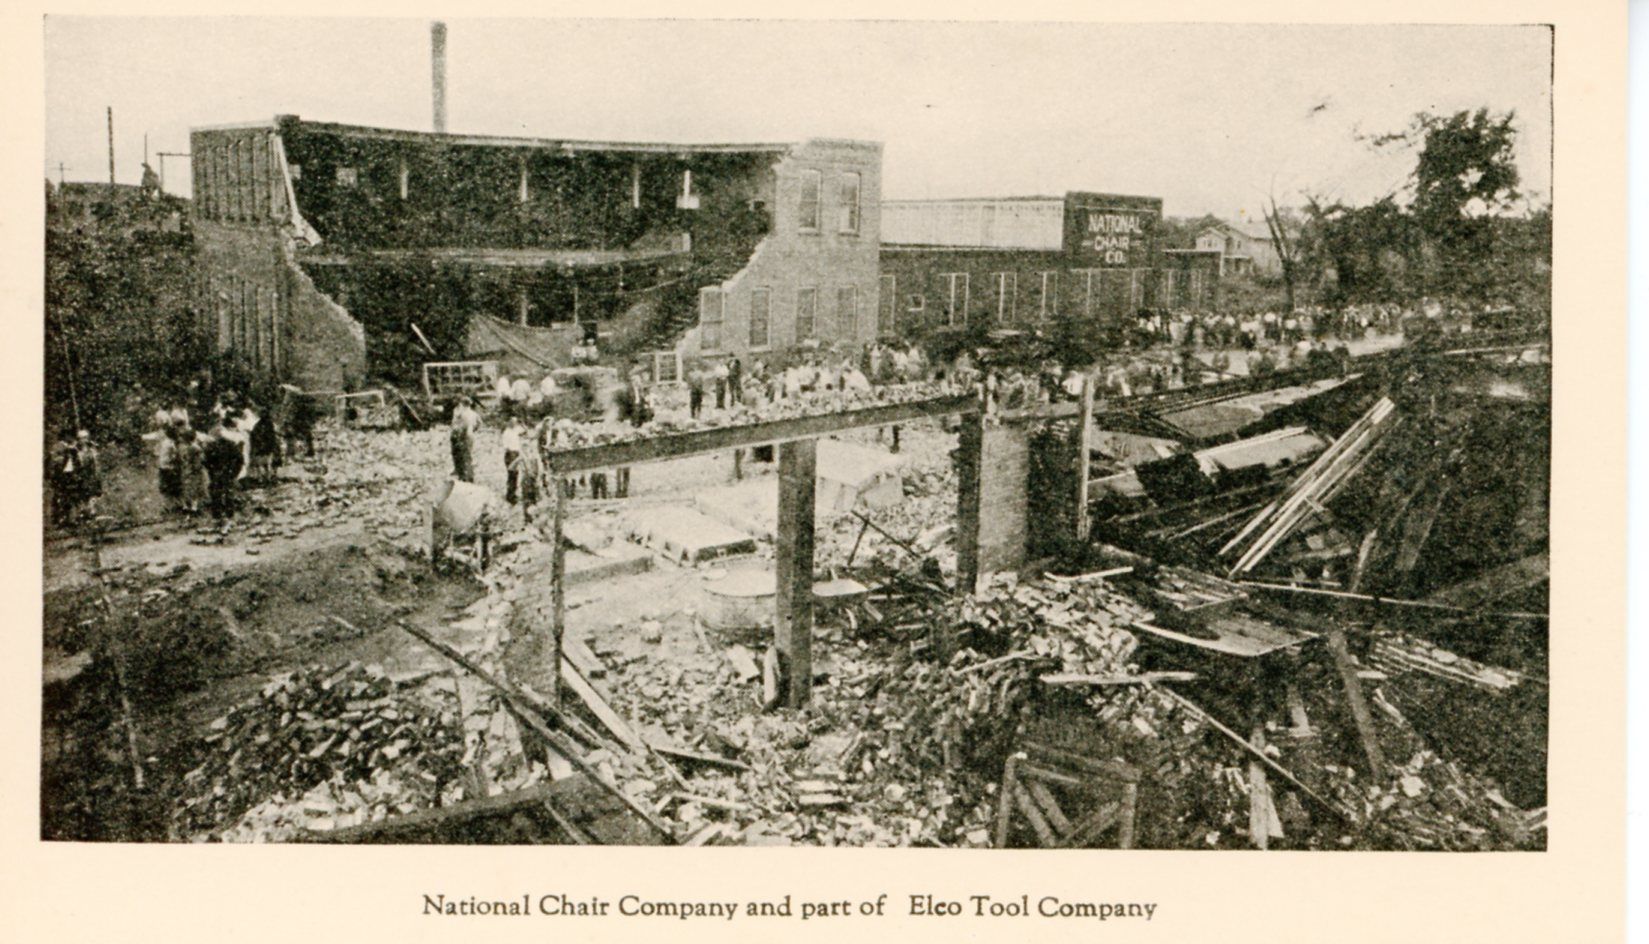 Damage to Elco Tool and National Furniture Company. Photo shows the roof and multiple walls collapsed in the foreground and another building in the background with the front wall collapsed.